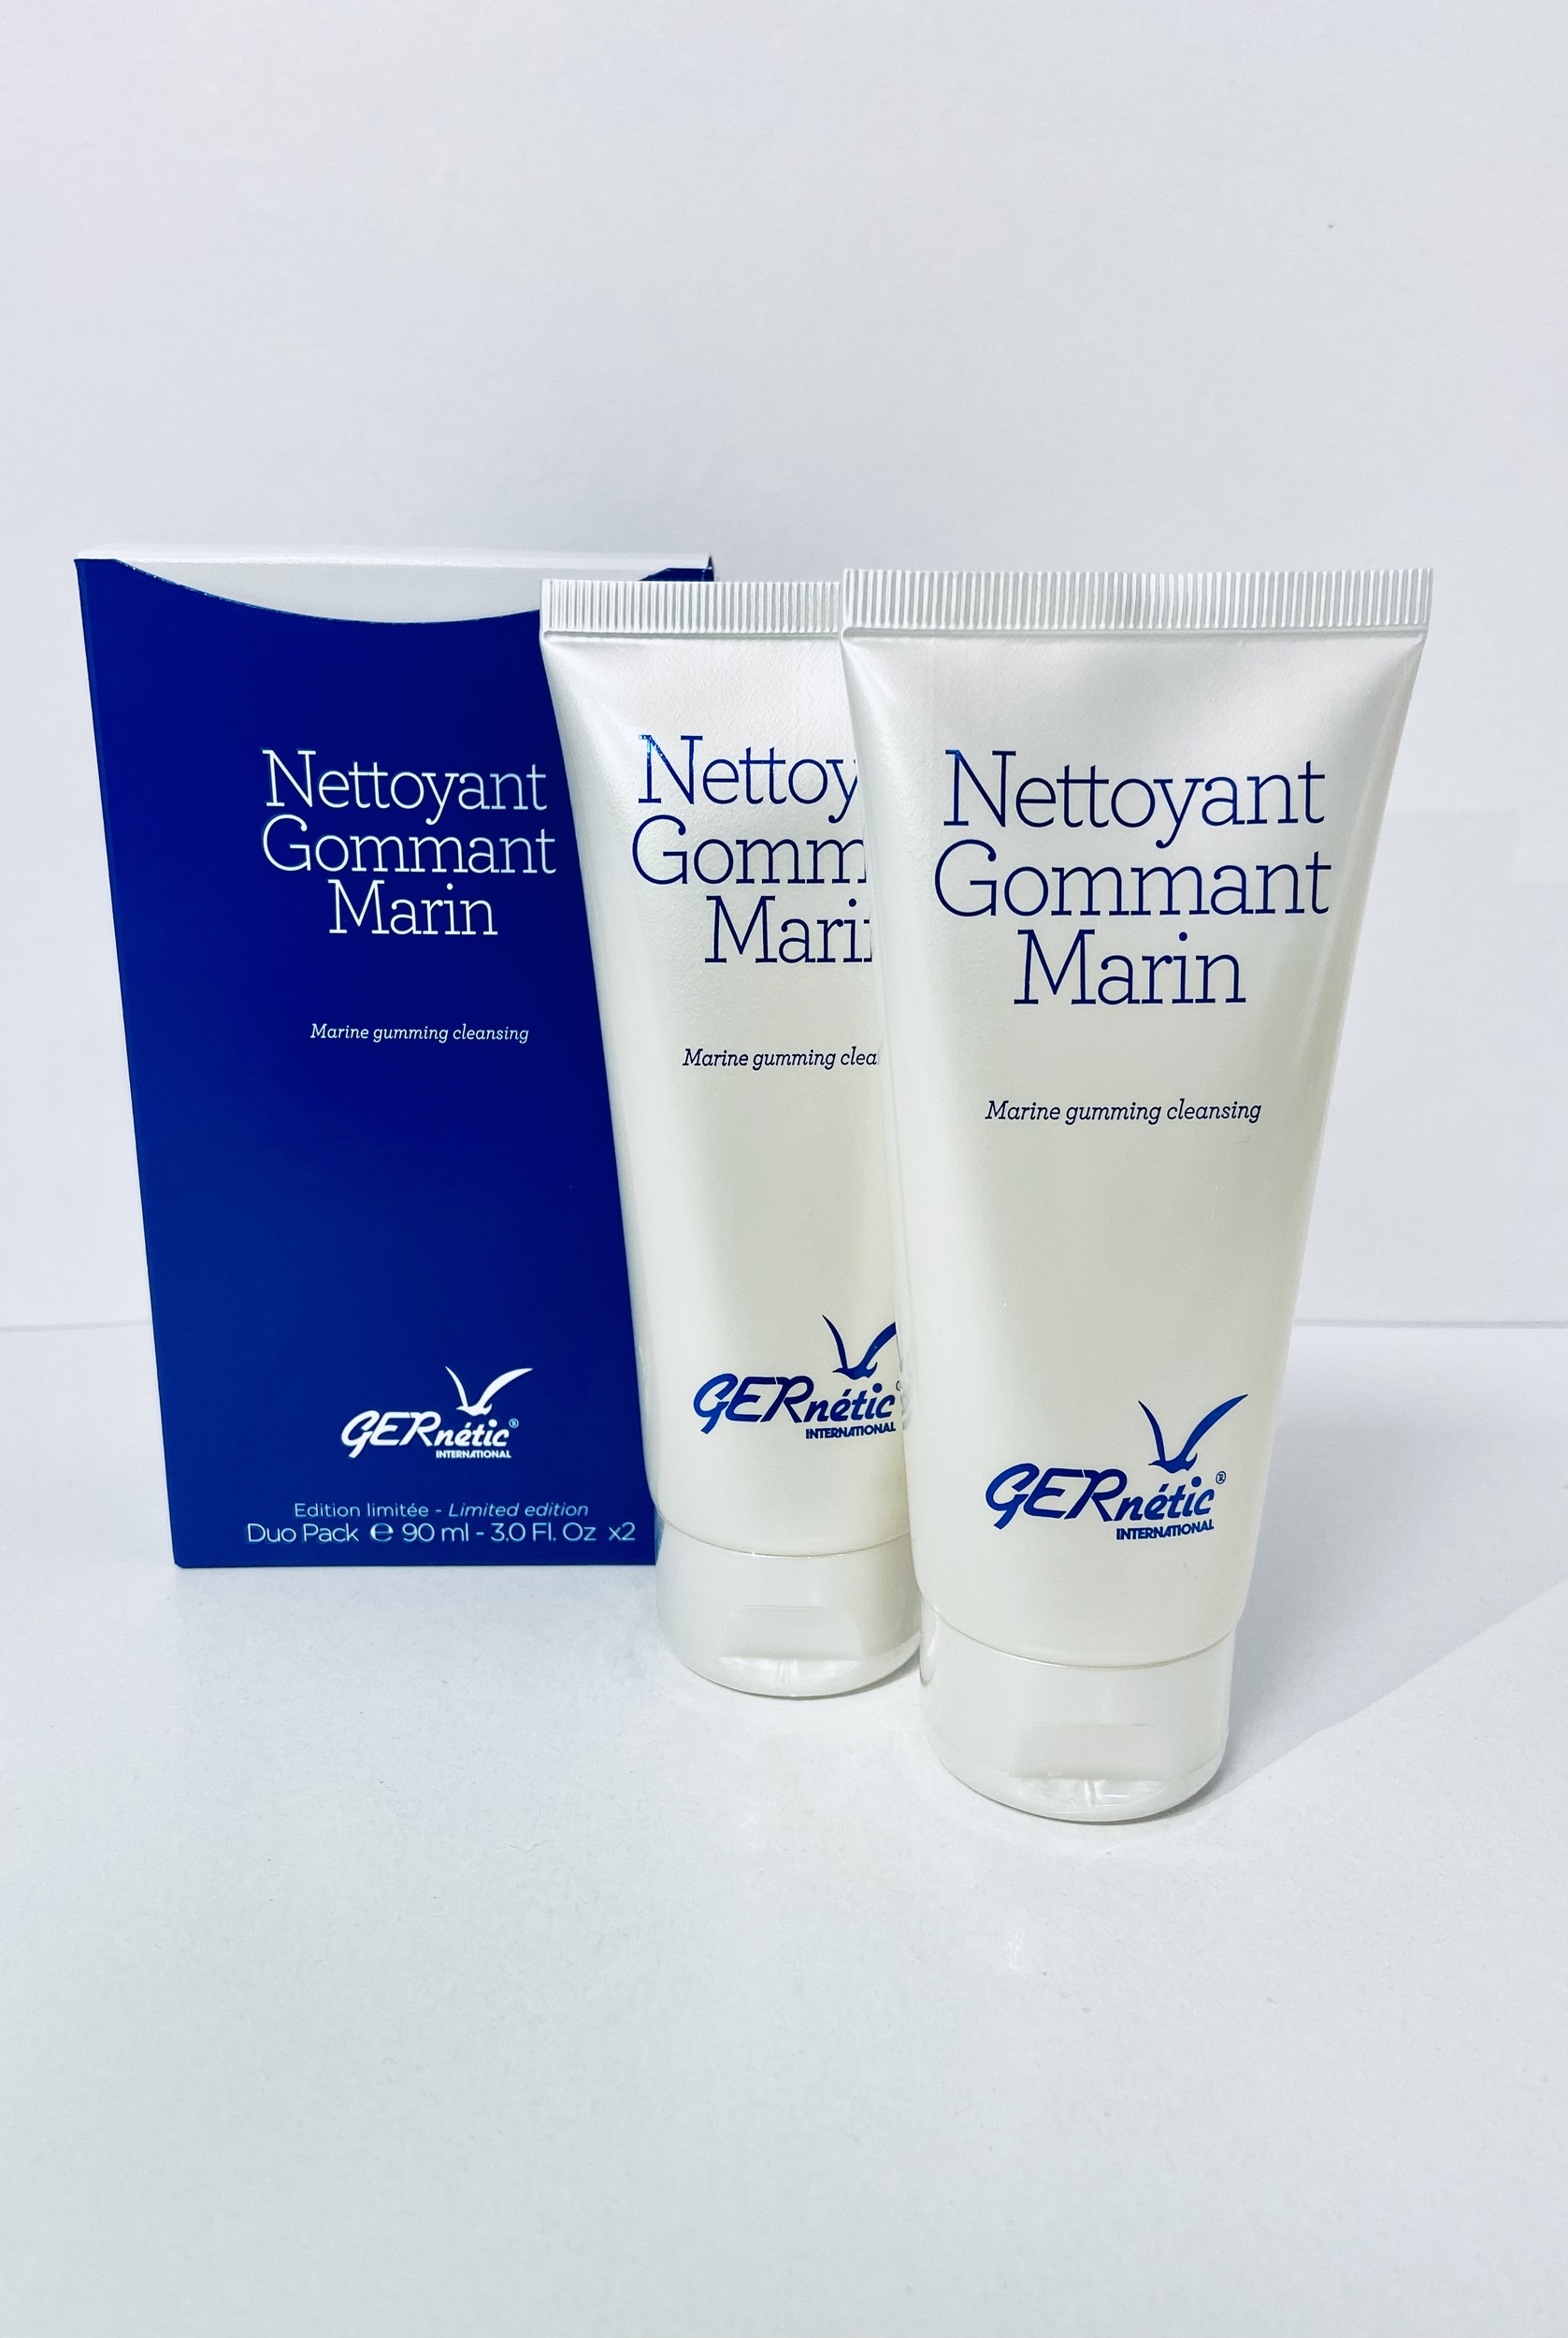 Gernetic duo pack nettoyant gommant marin visage